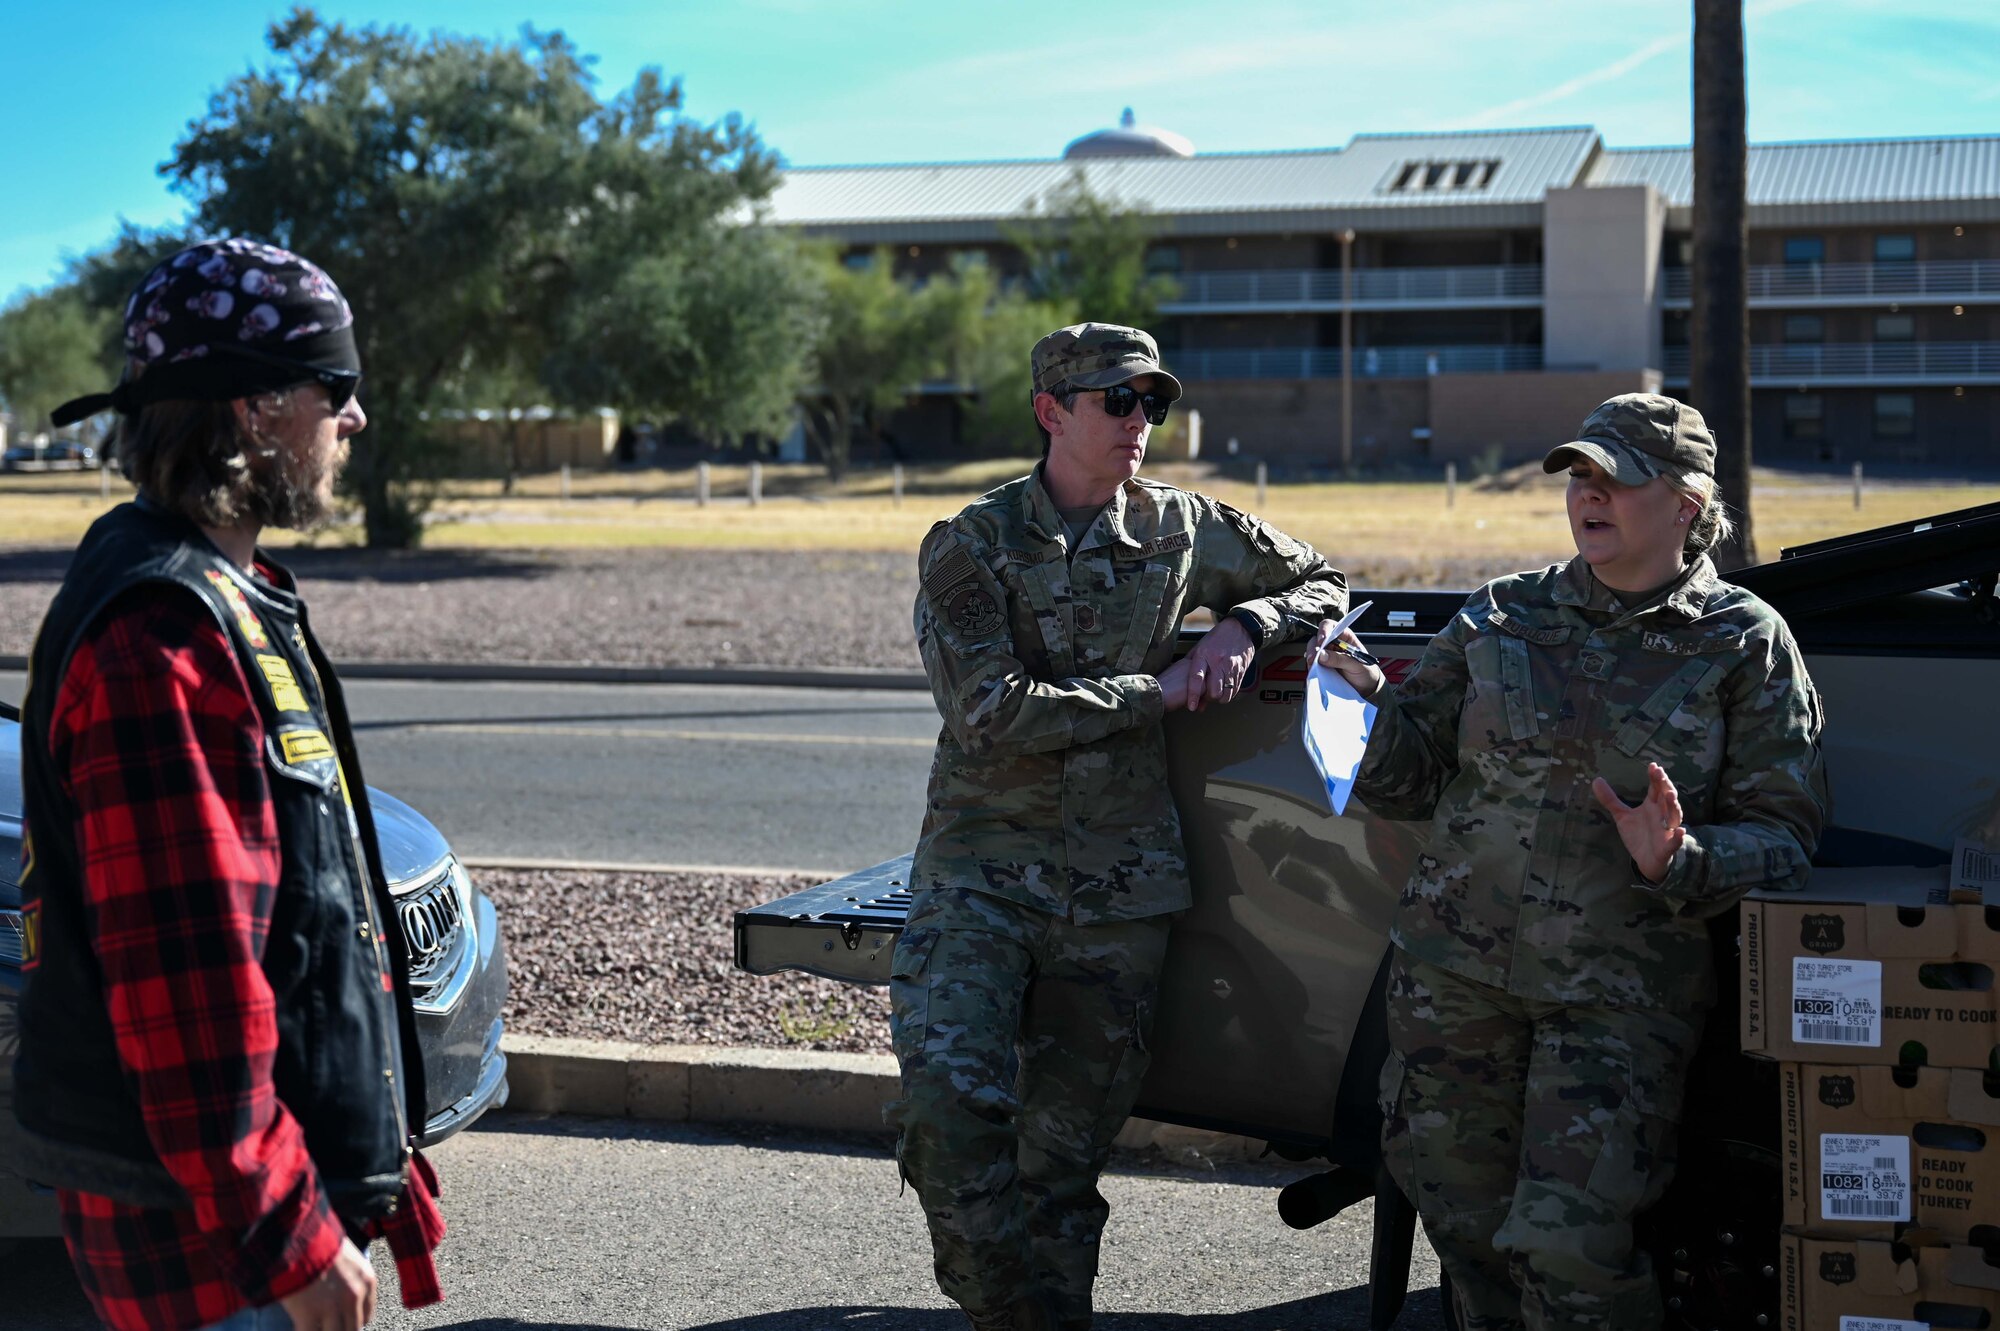 A photo of military members distributing turkeys during a turkey drive.